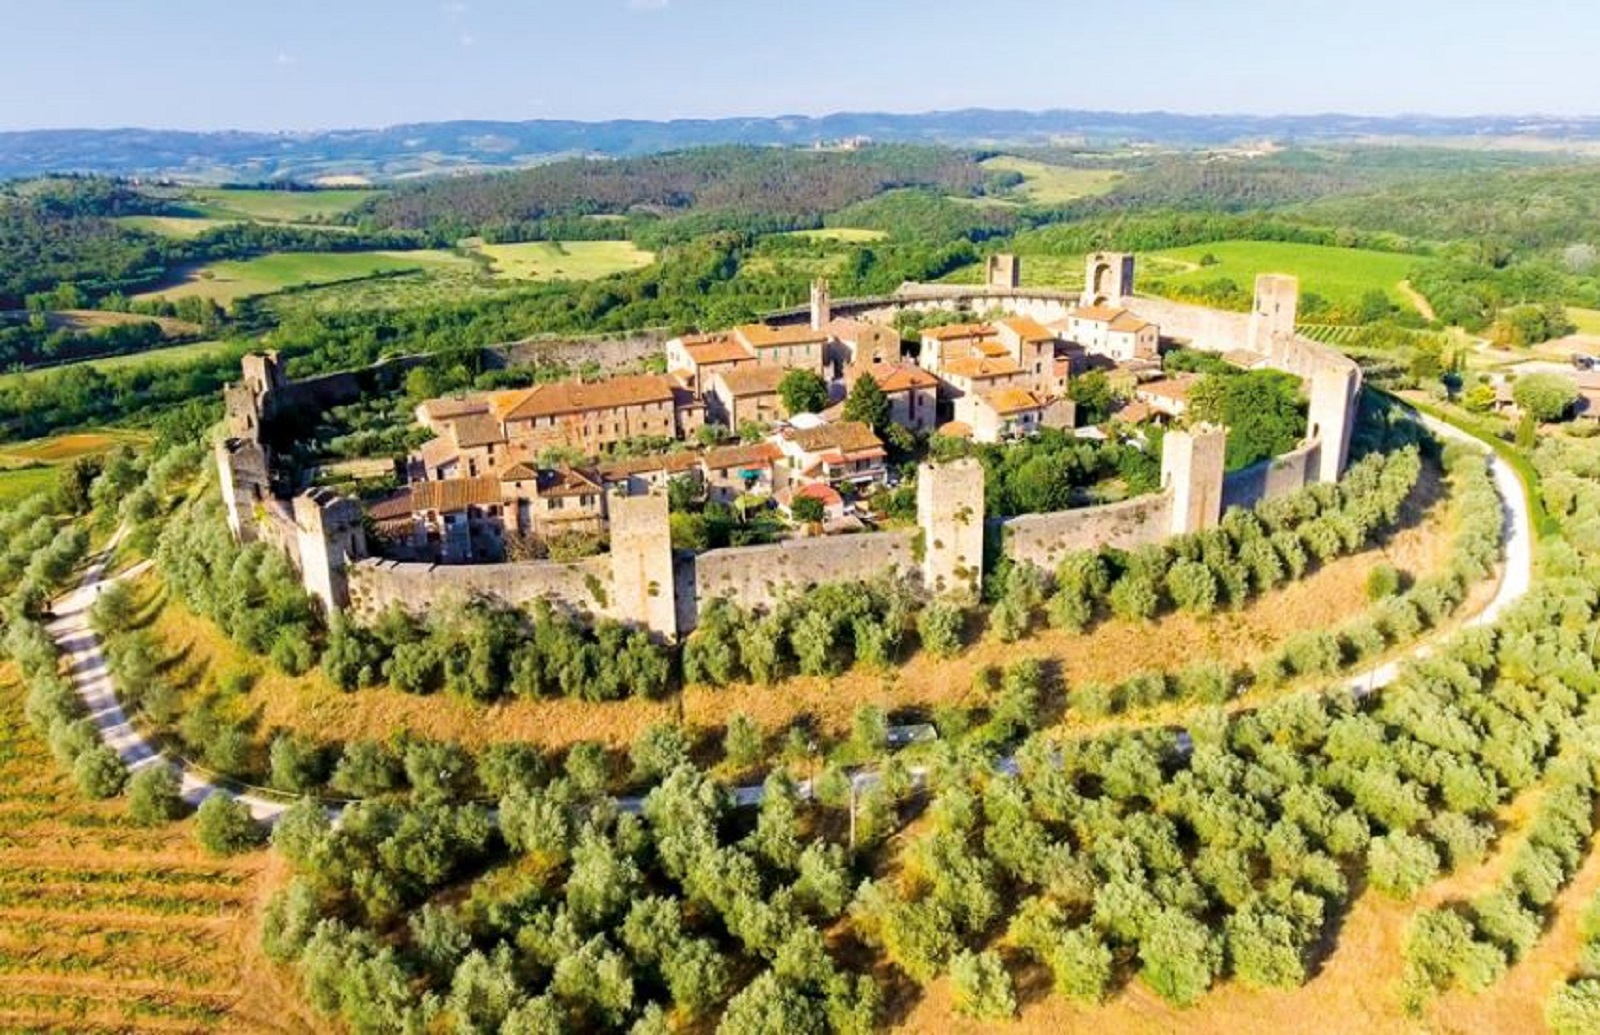 The Chianti tour will allow you to discover the most characteristic villages of this part of Tuscany